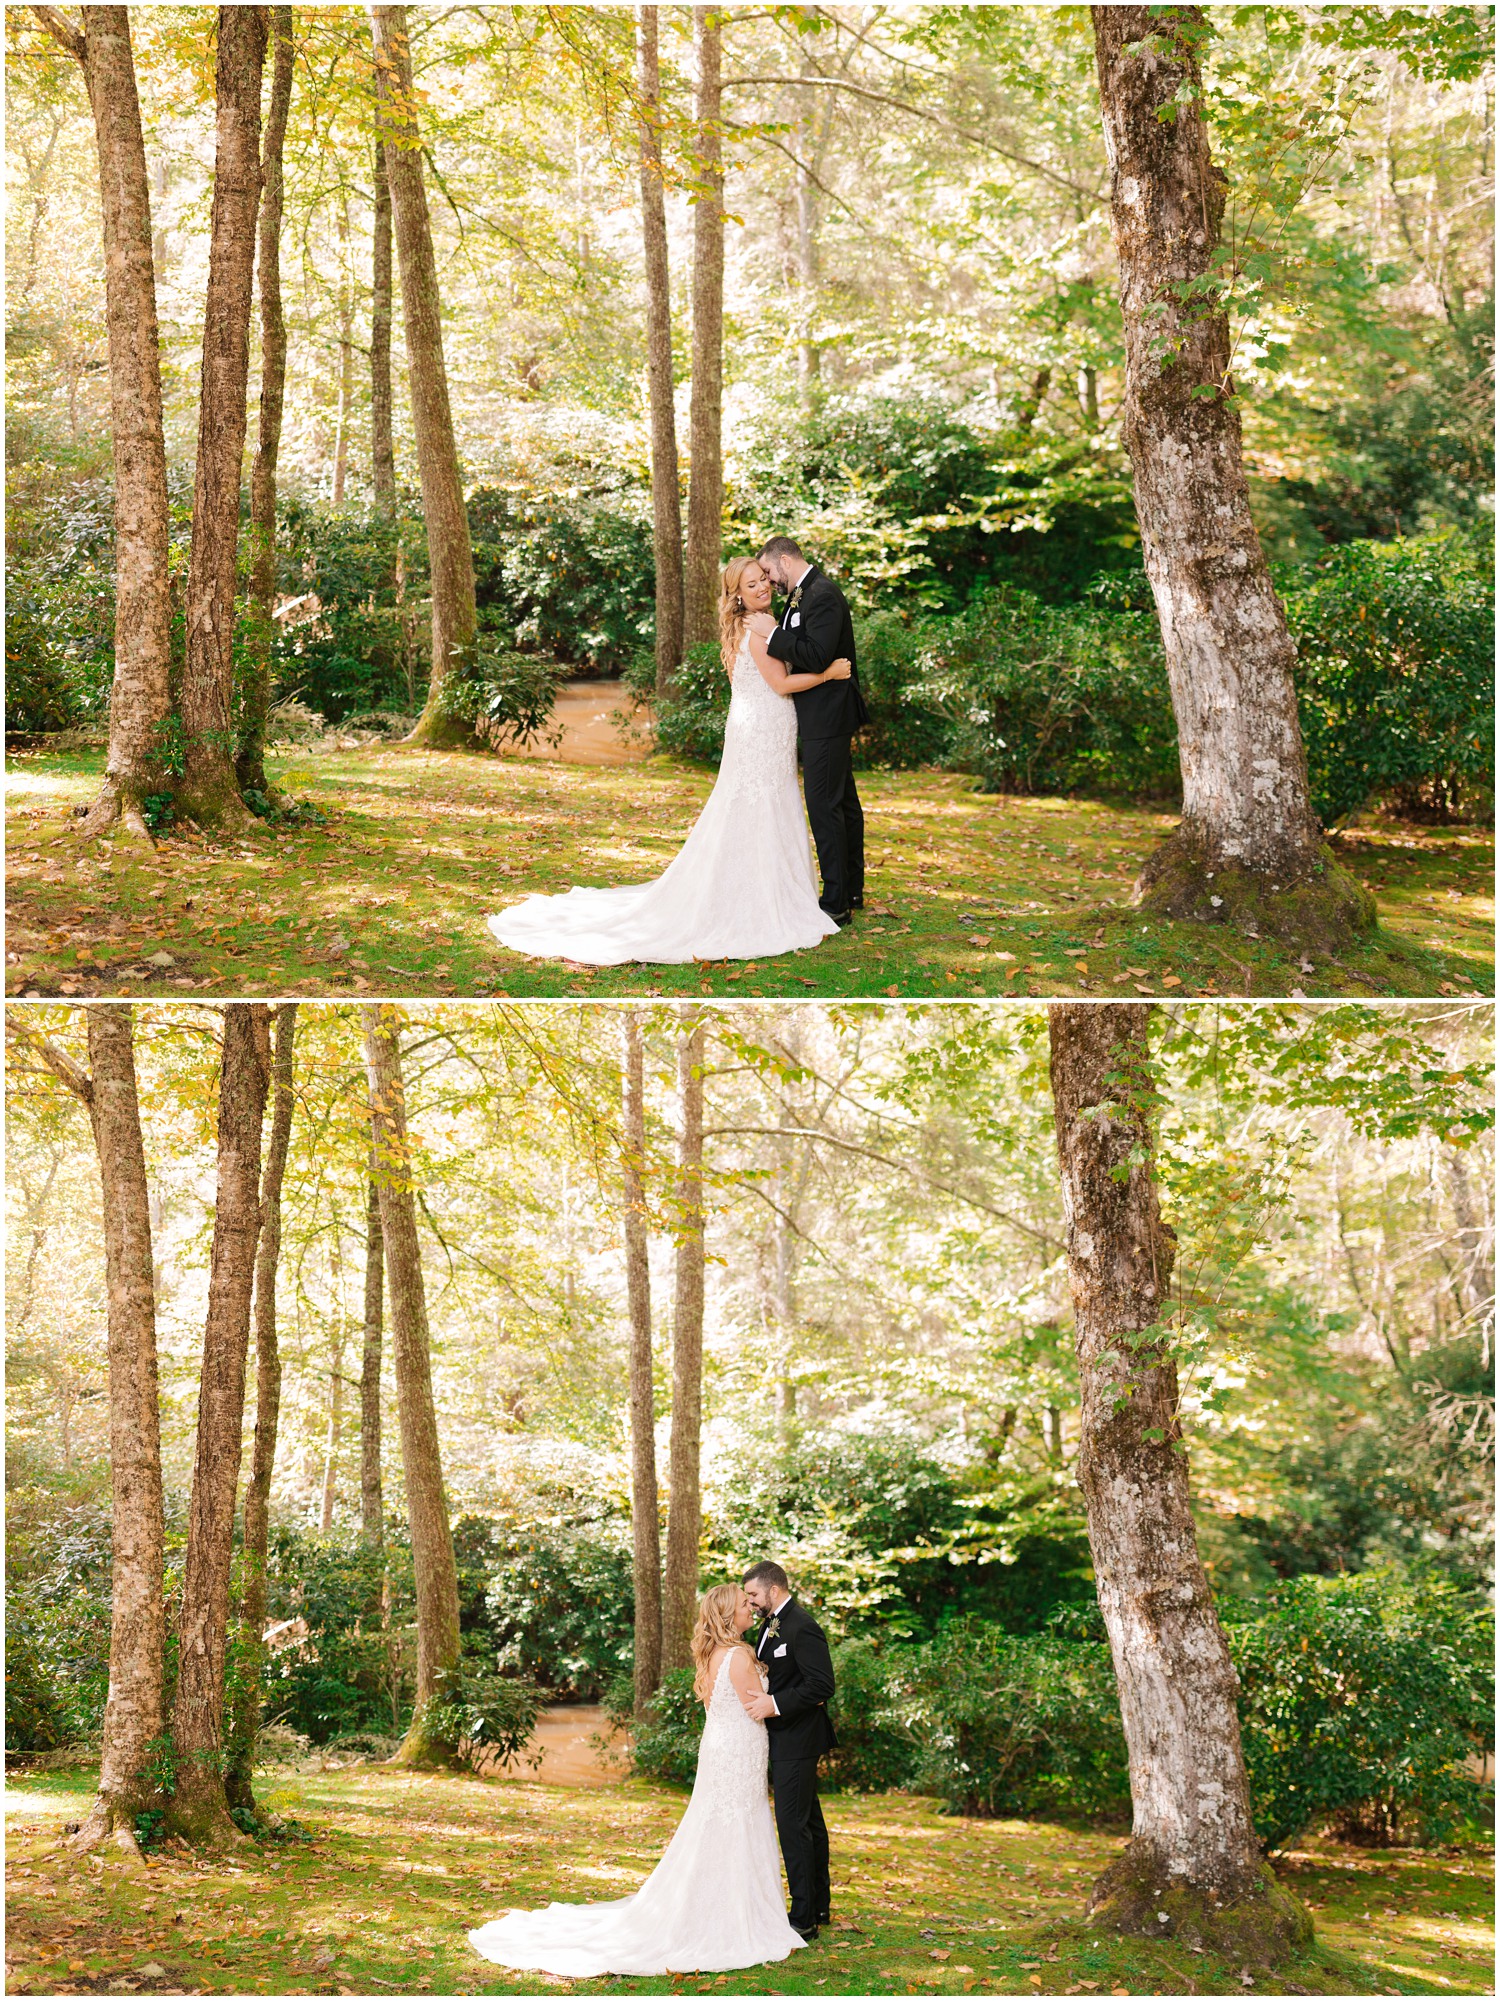 Wedding at Old Edwards Inn with fall wedding portraits by Chelsea Renay